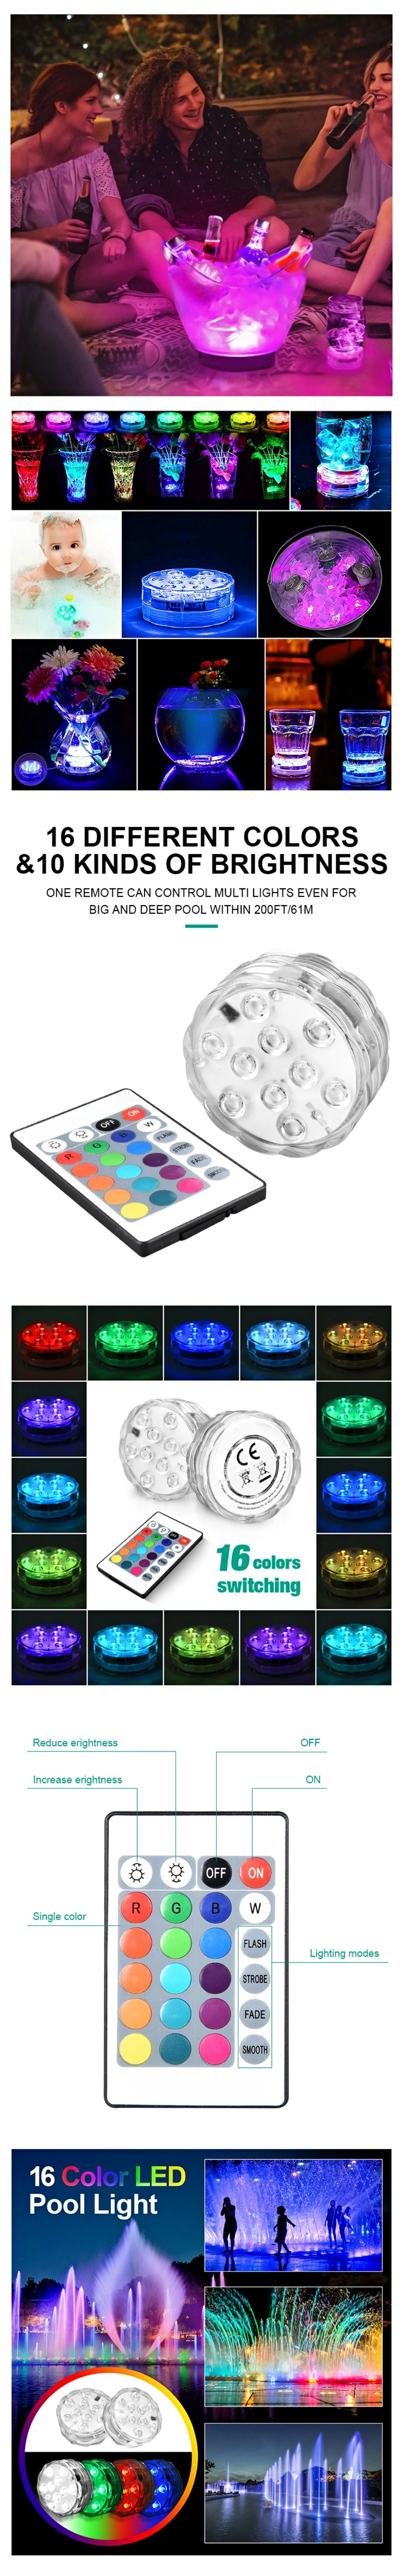 10 LEDs Remote Control Waterproof IP68 RGB Submersible Pool Light